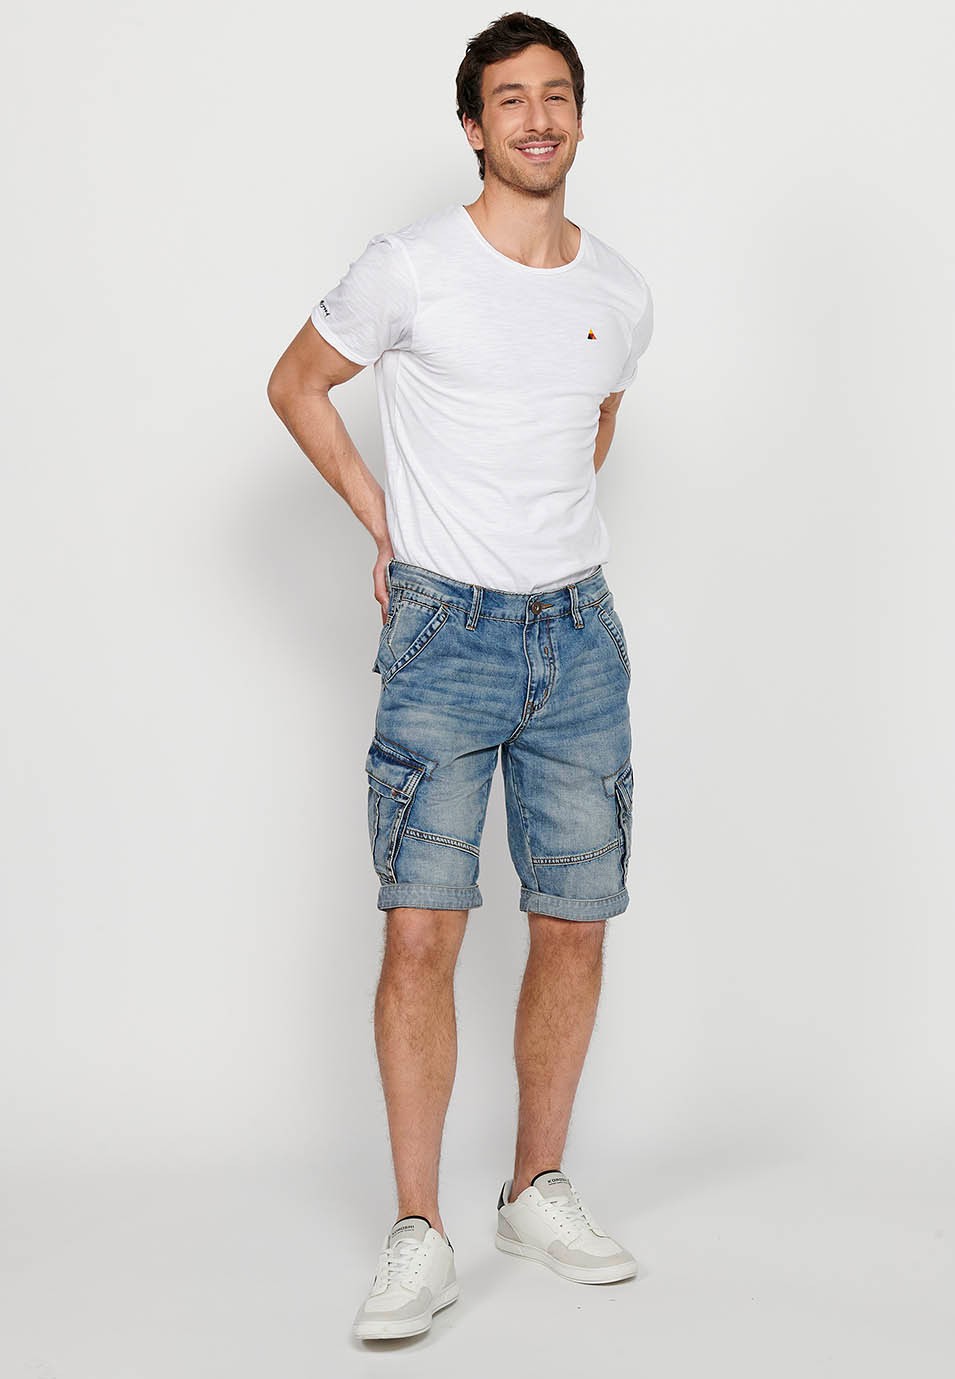 Denim Bermuda cargo shorts with front zipper and button closure with five pockets, one blue pocket pocket for Men 1